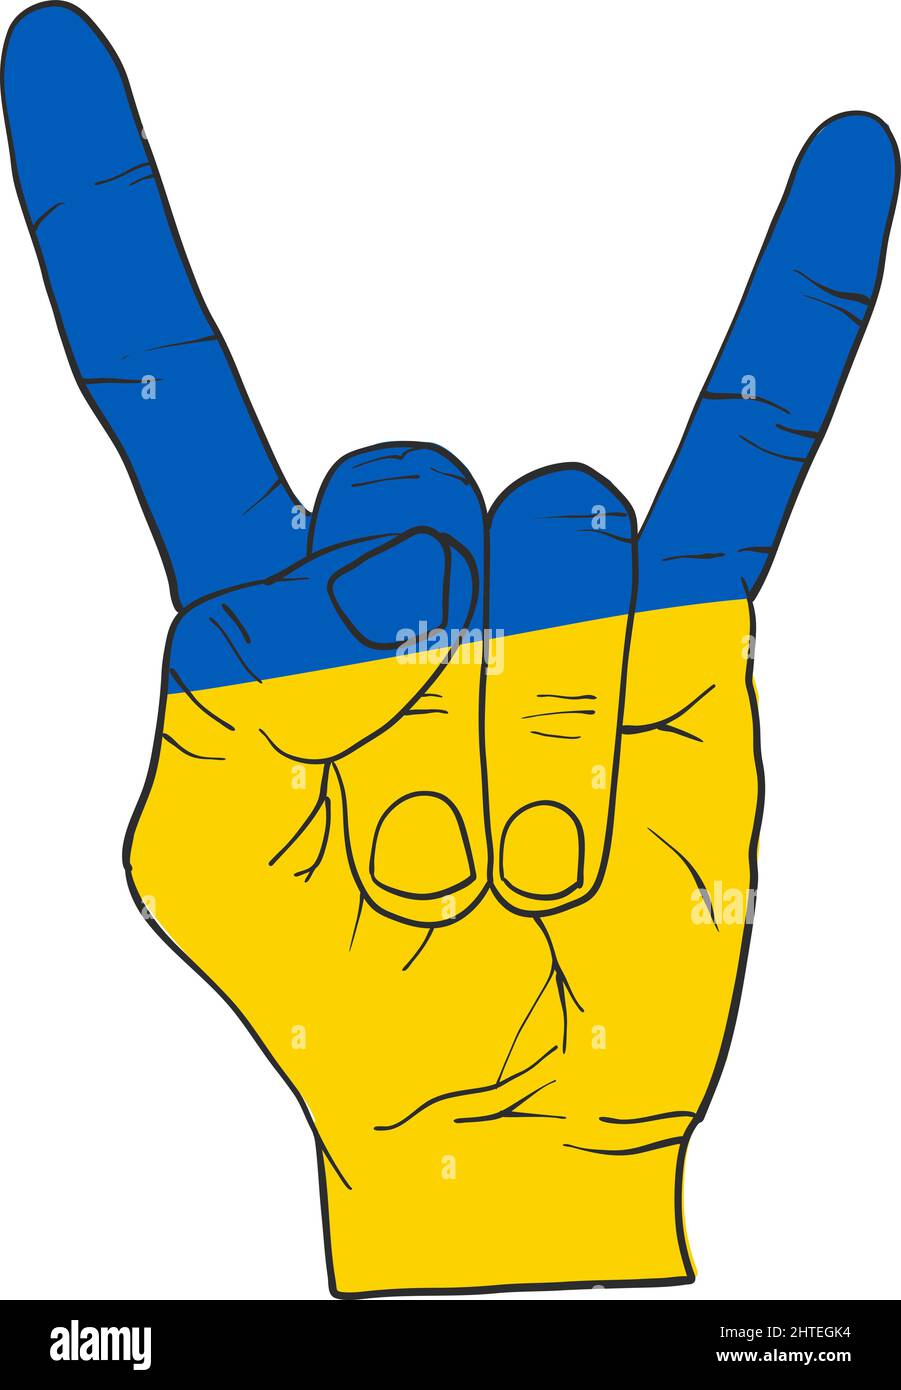 Freedom hand sign for Ukrainian people. Support icon for Kyiv and Ukraine people. Stay Strong together. Patriotic symbol, icon.-SupplementalCategories Stock Vector